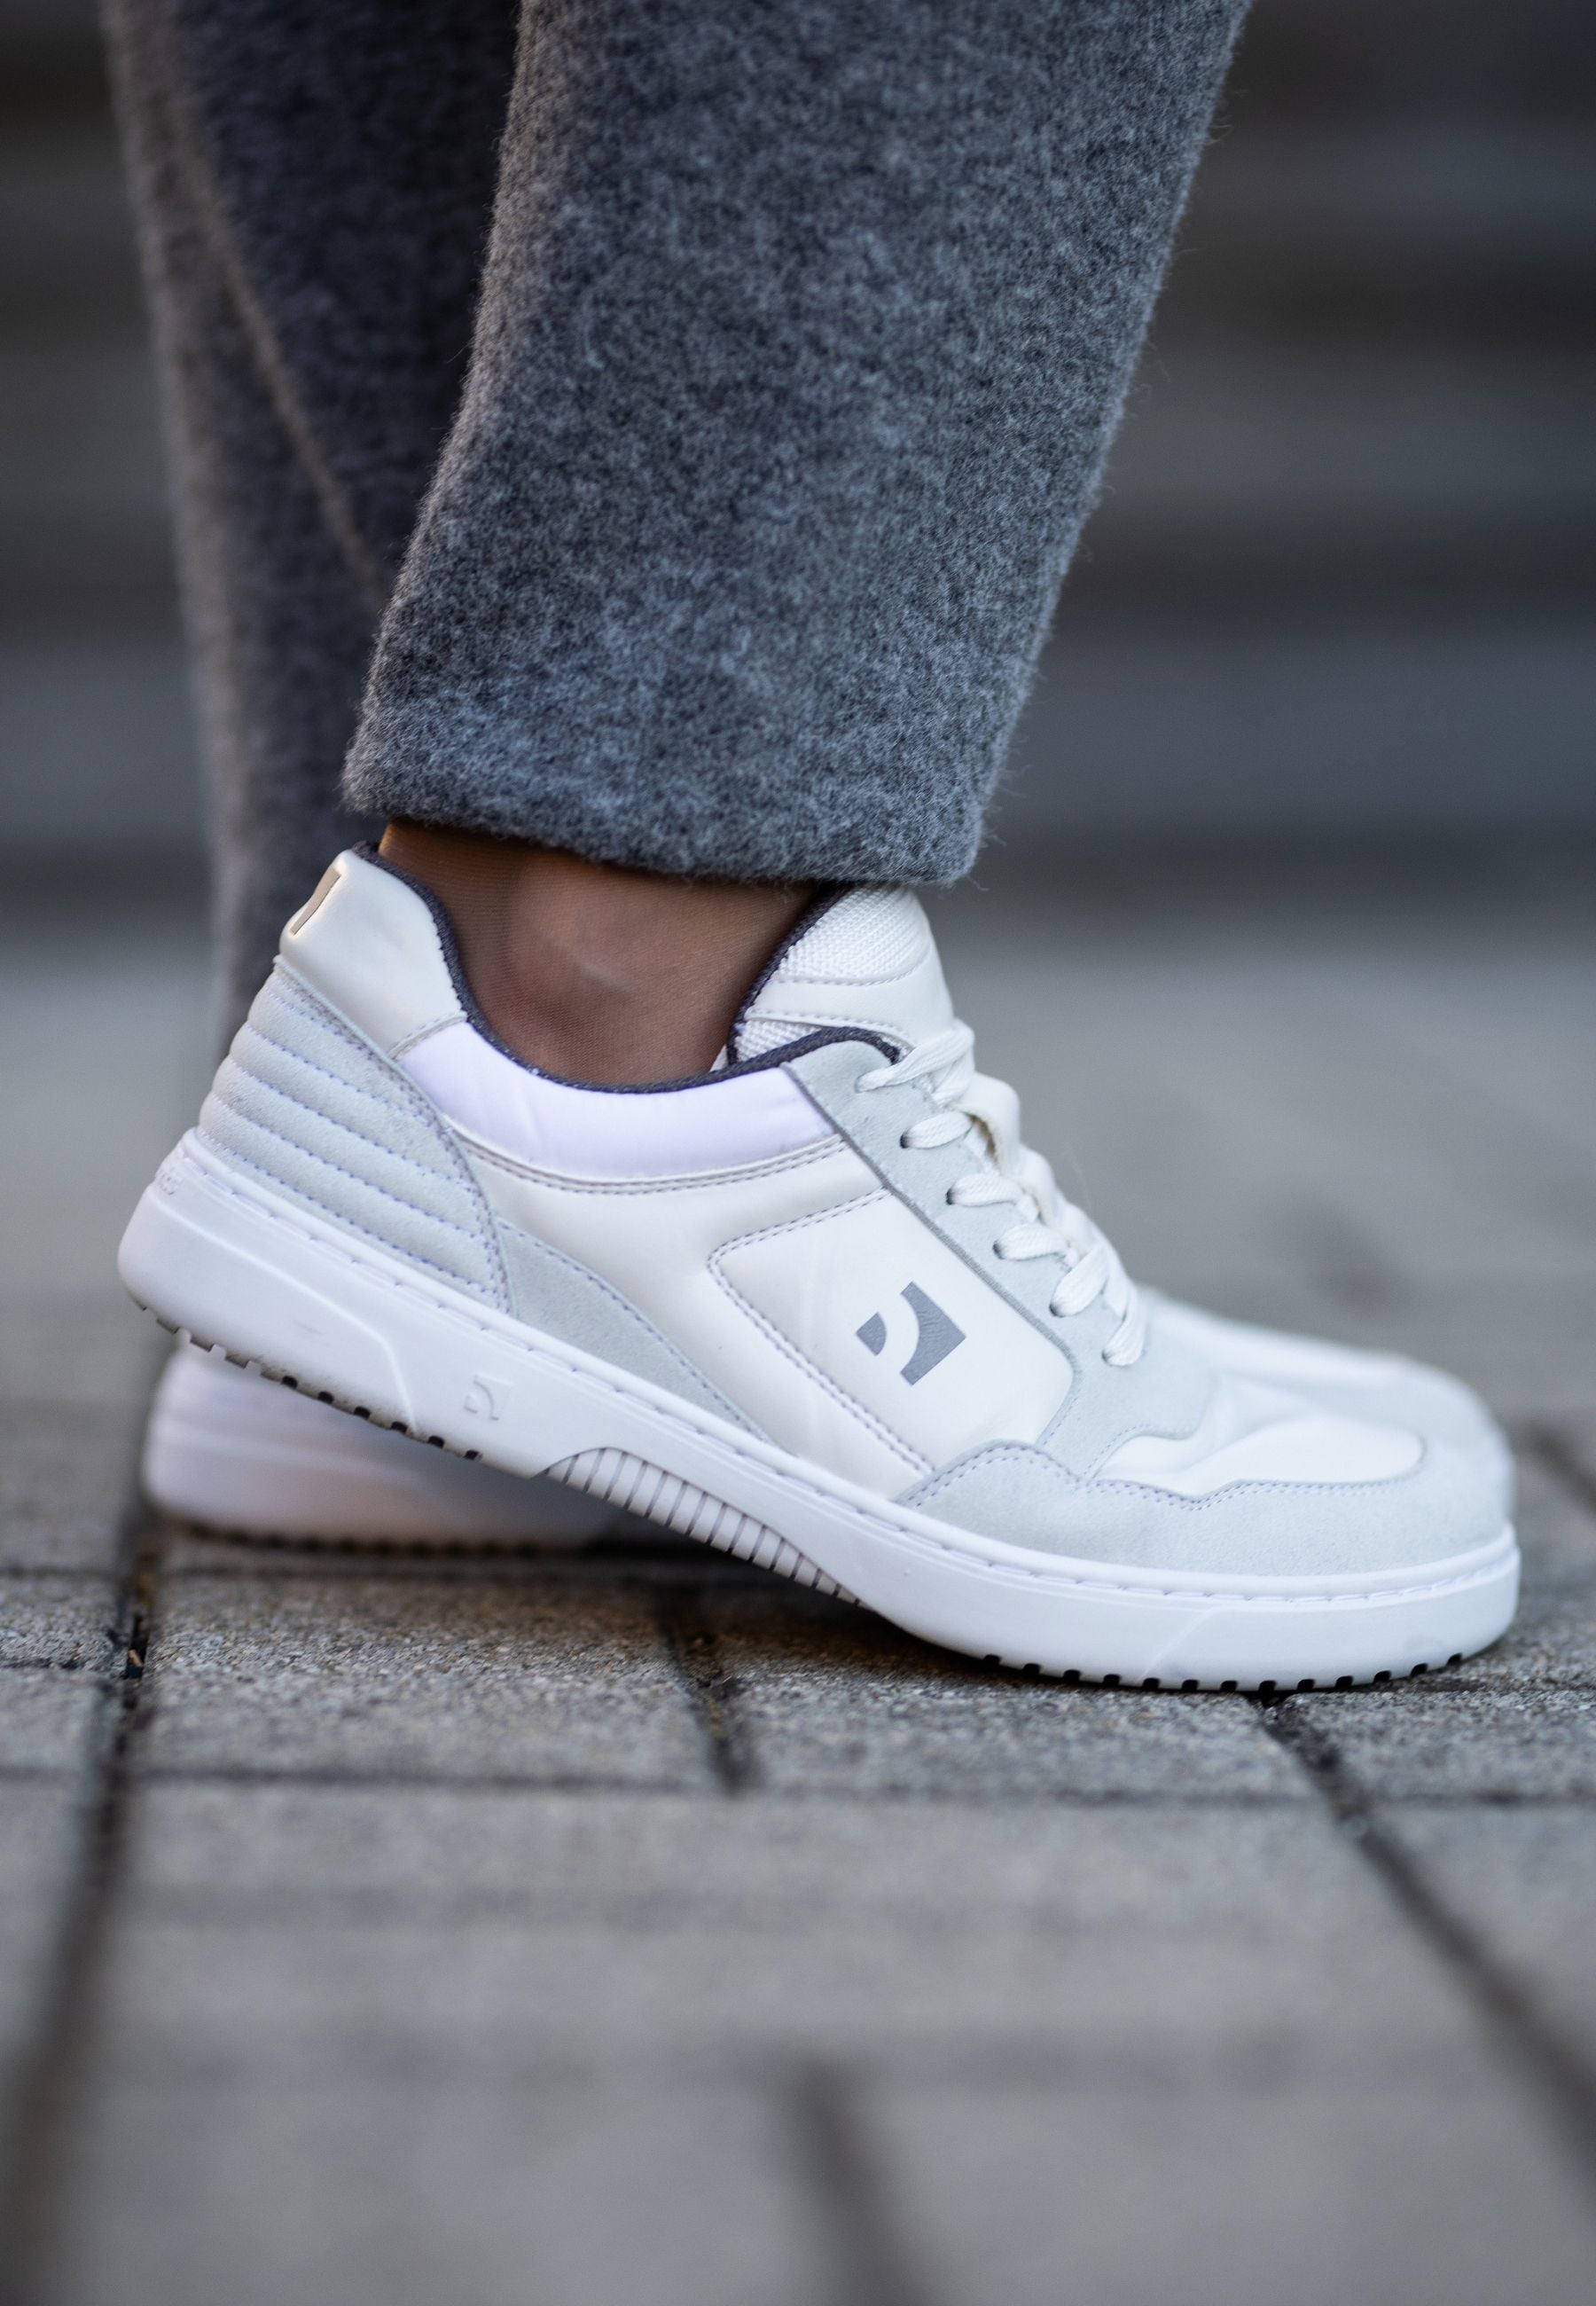 ["Lift your urban street style with Barebarics Axiom - featuring a padded design and stylish stitching for that classy casual look. Being incredibly comfortable and effortlessly combinable with various casual outfits, they can quickly become your go-to pair of barefoot sneakers."]